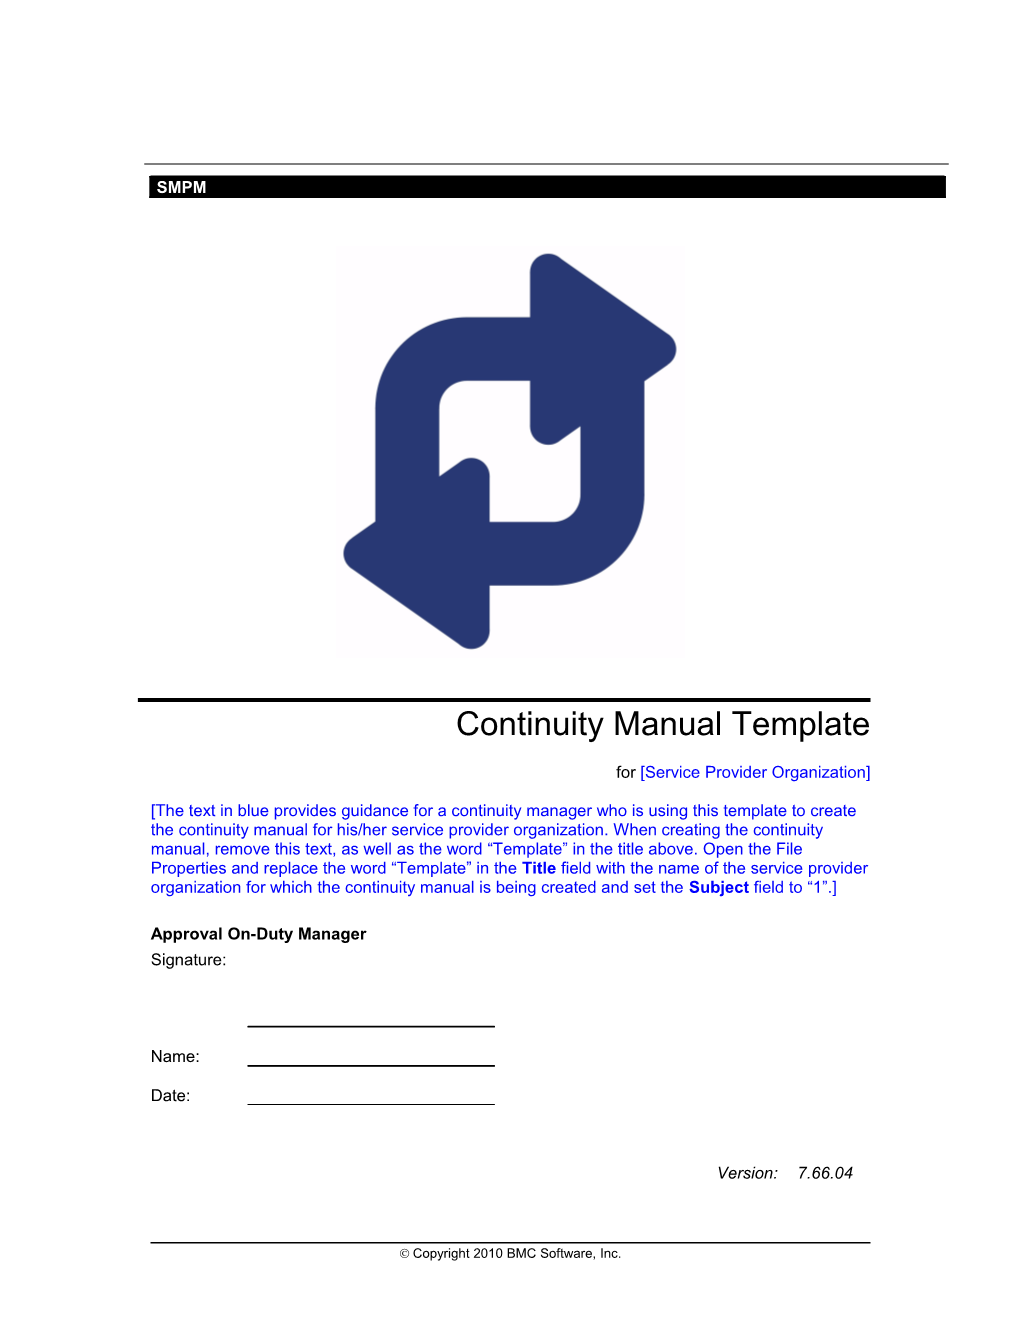 Continuity Manual Template